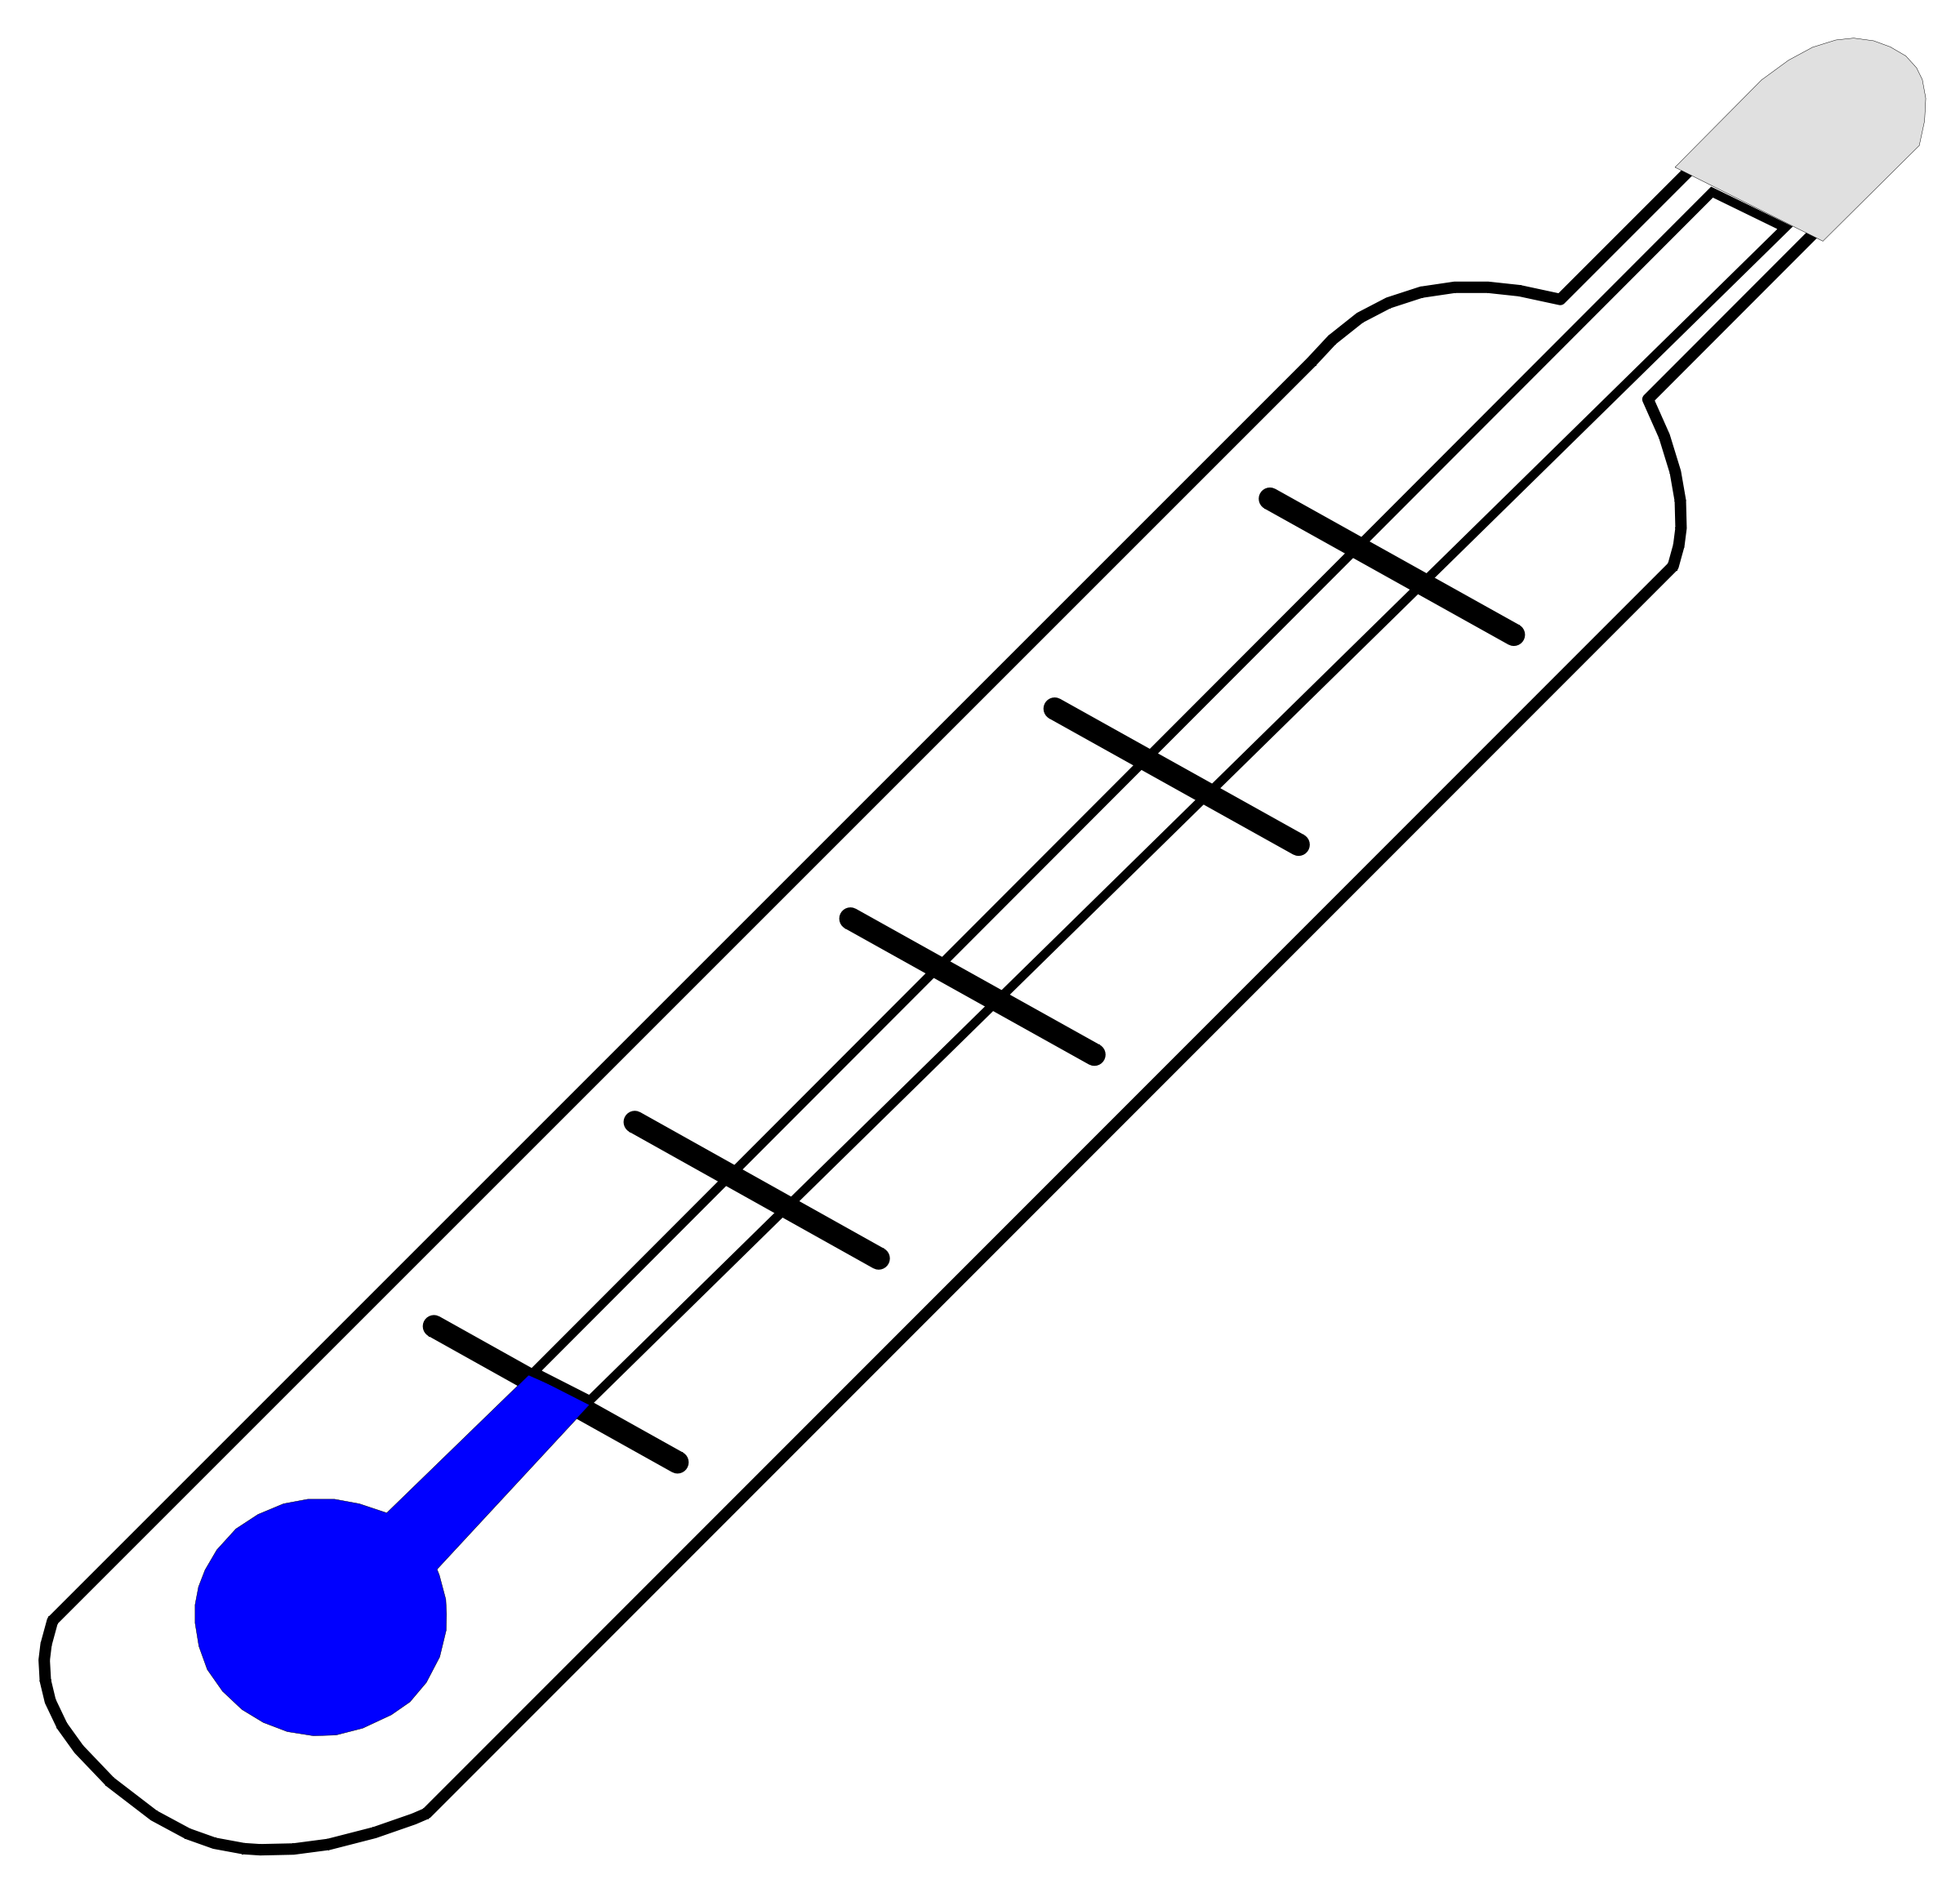 Frozen Thermometer Clip Art | Clipart Panda - Free Clipart Images